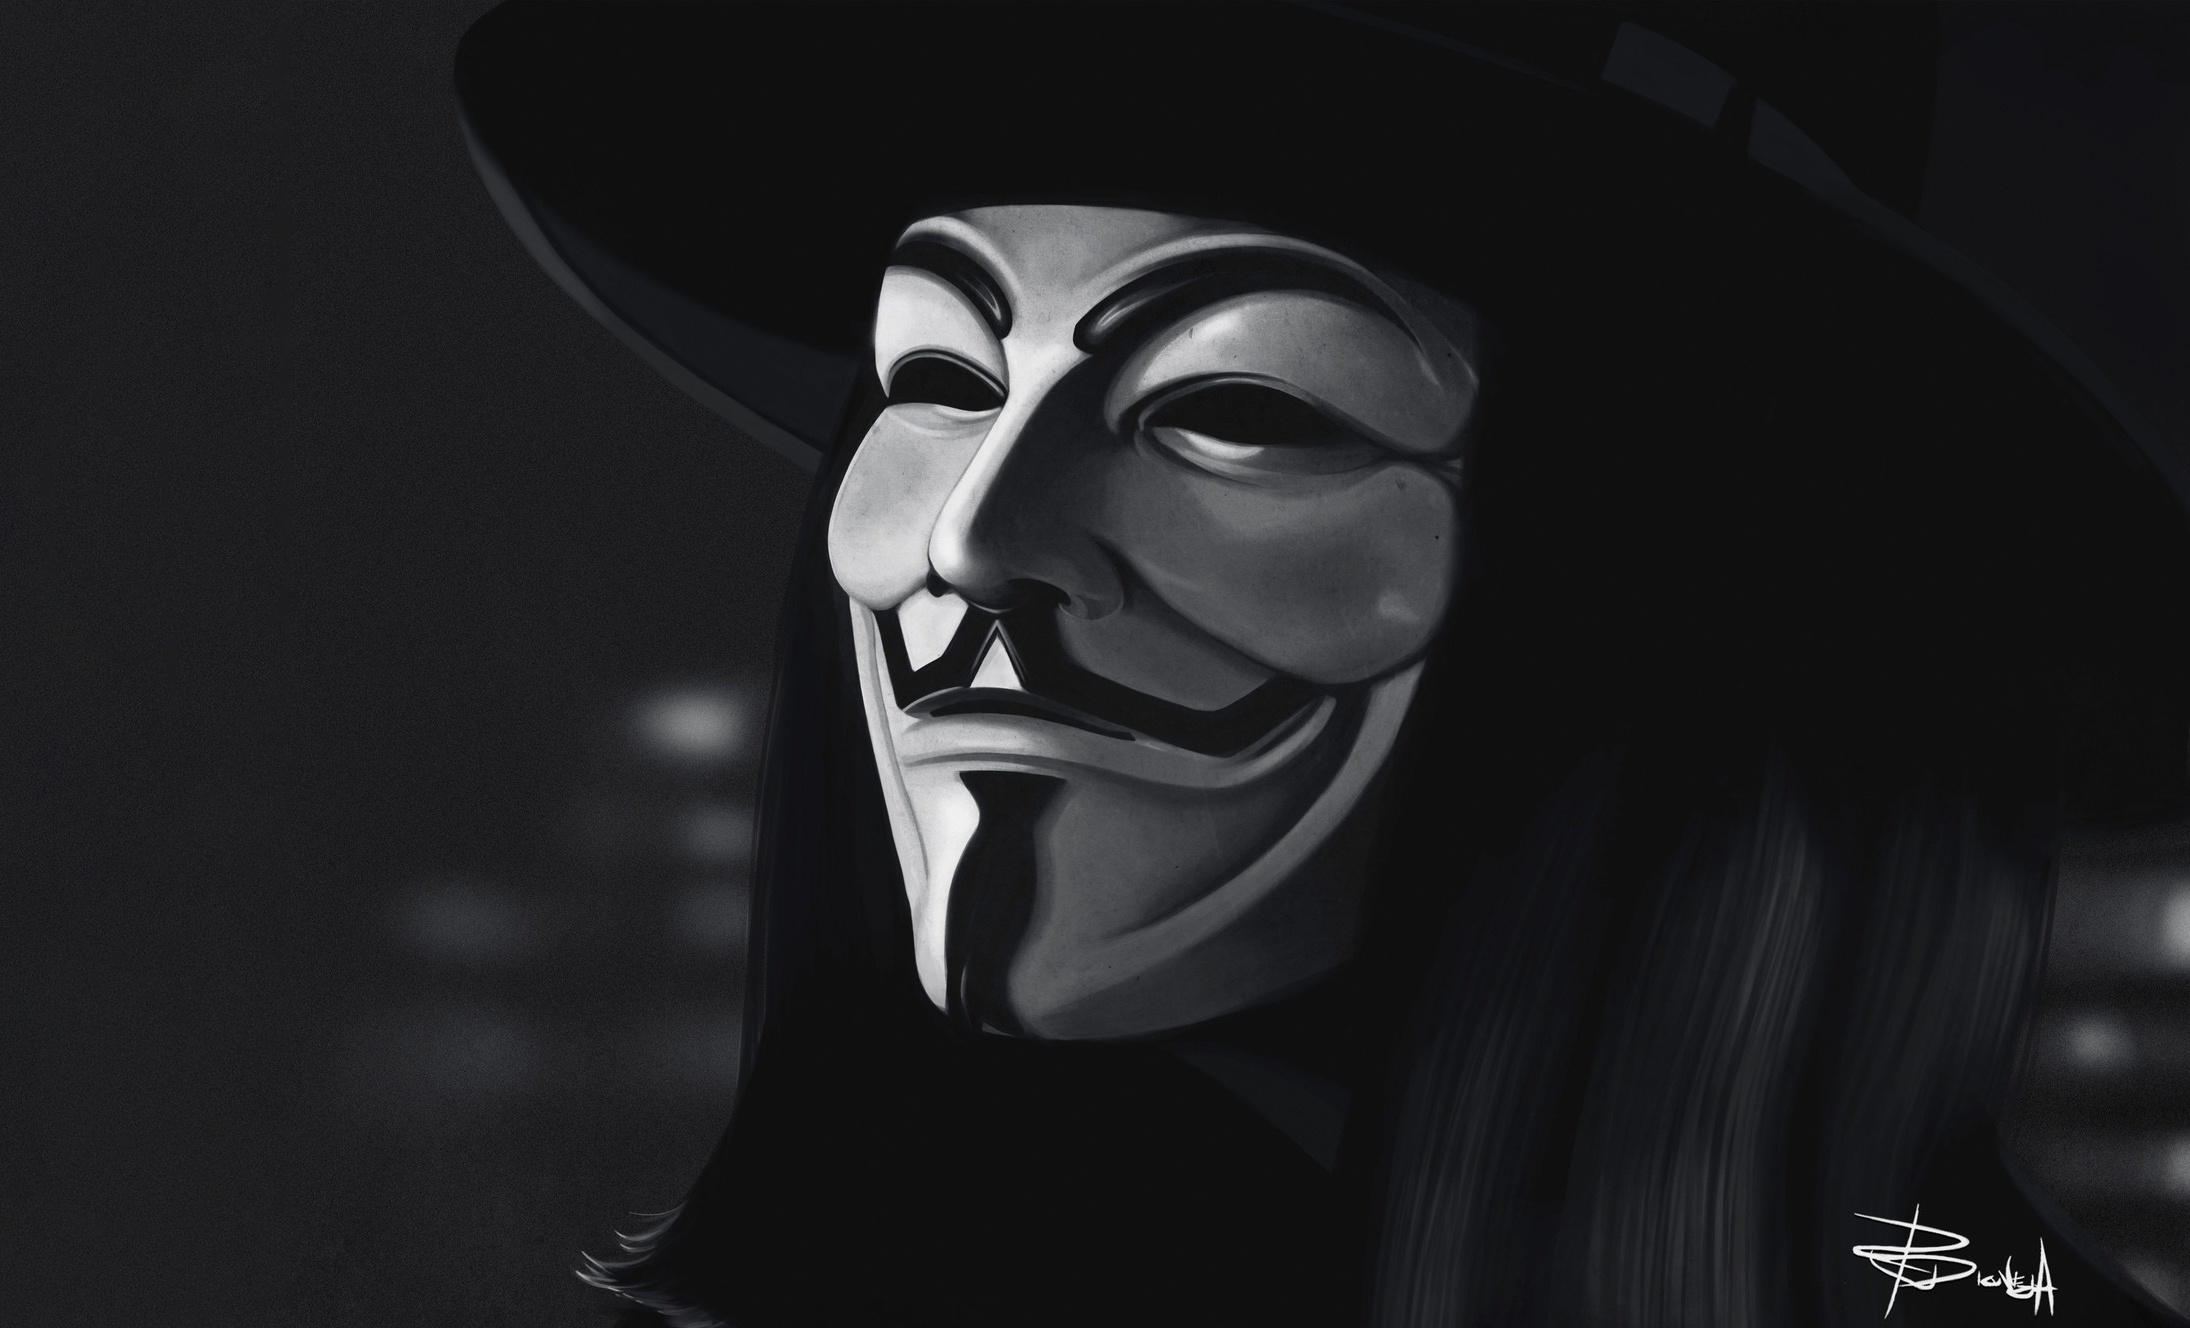 Guy Fawkes Mask: Gained popularity after being featured in the movie adaptation of "V for Vendetta". 2190x1330 HD Wallpaper.